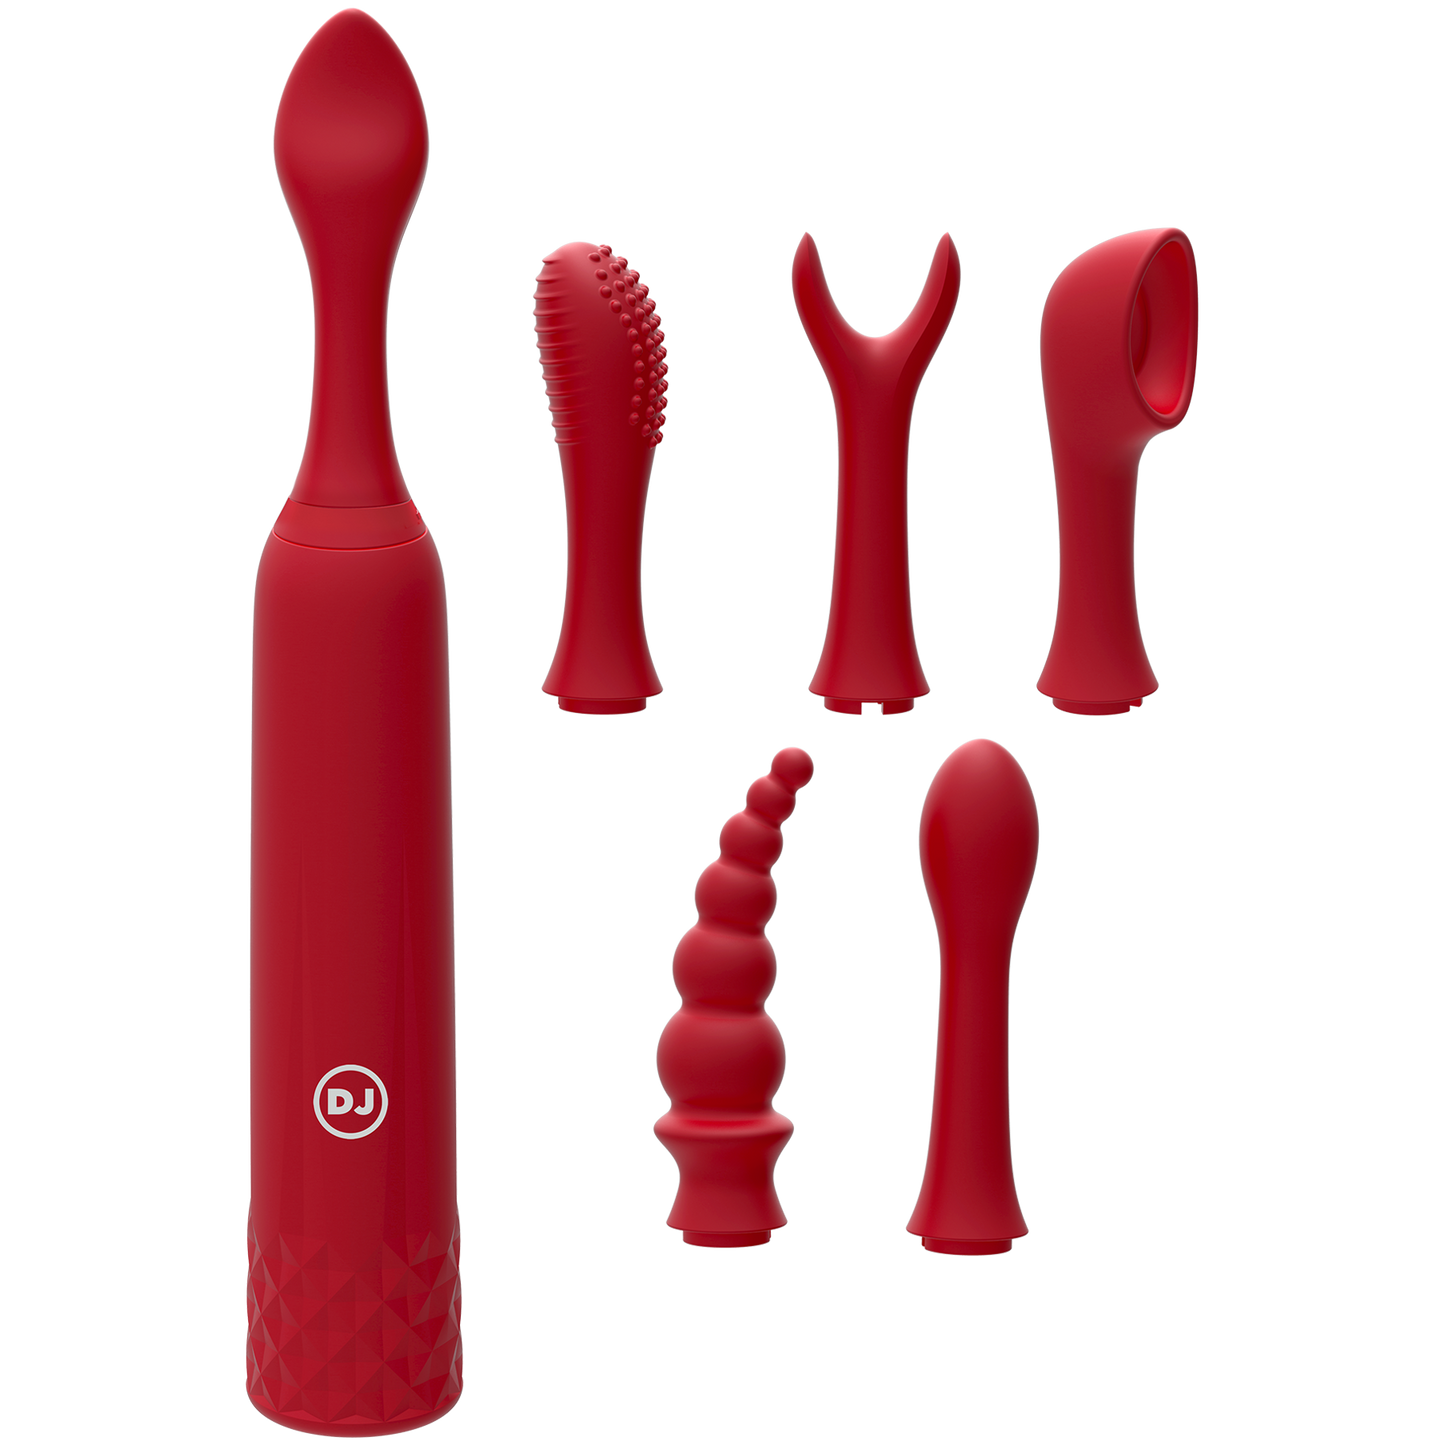 iVibe Select iQuiver 7 Piece Set Clit Vibrator - Red Velvet - Thorn & Feather